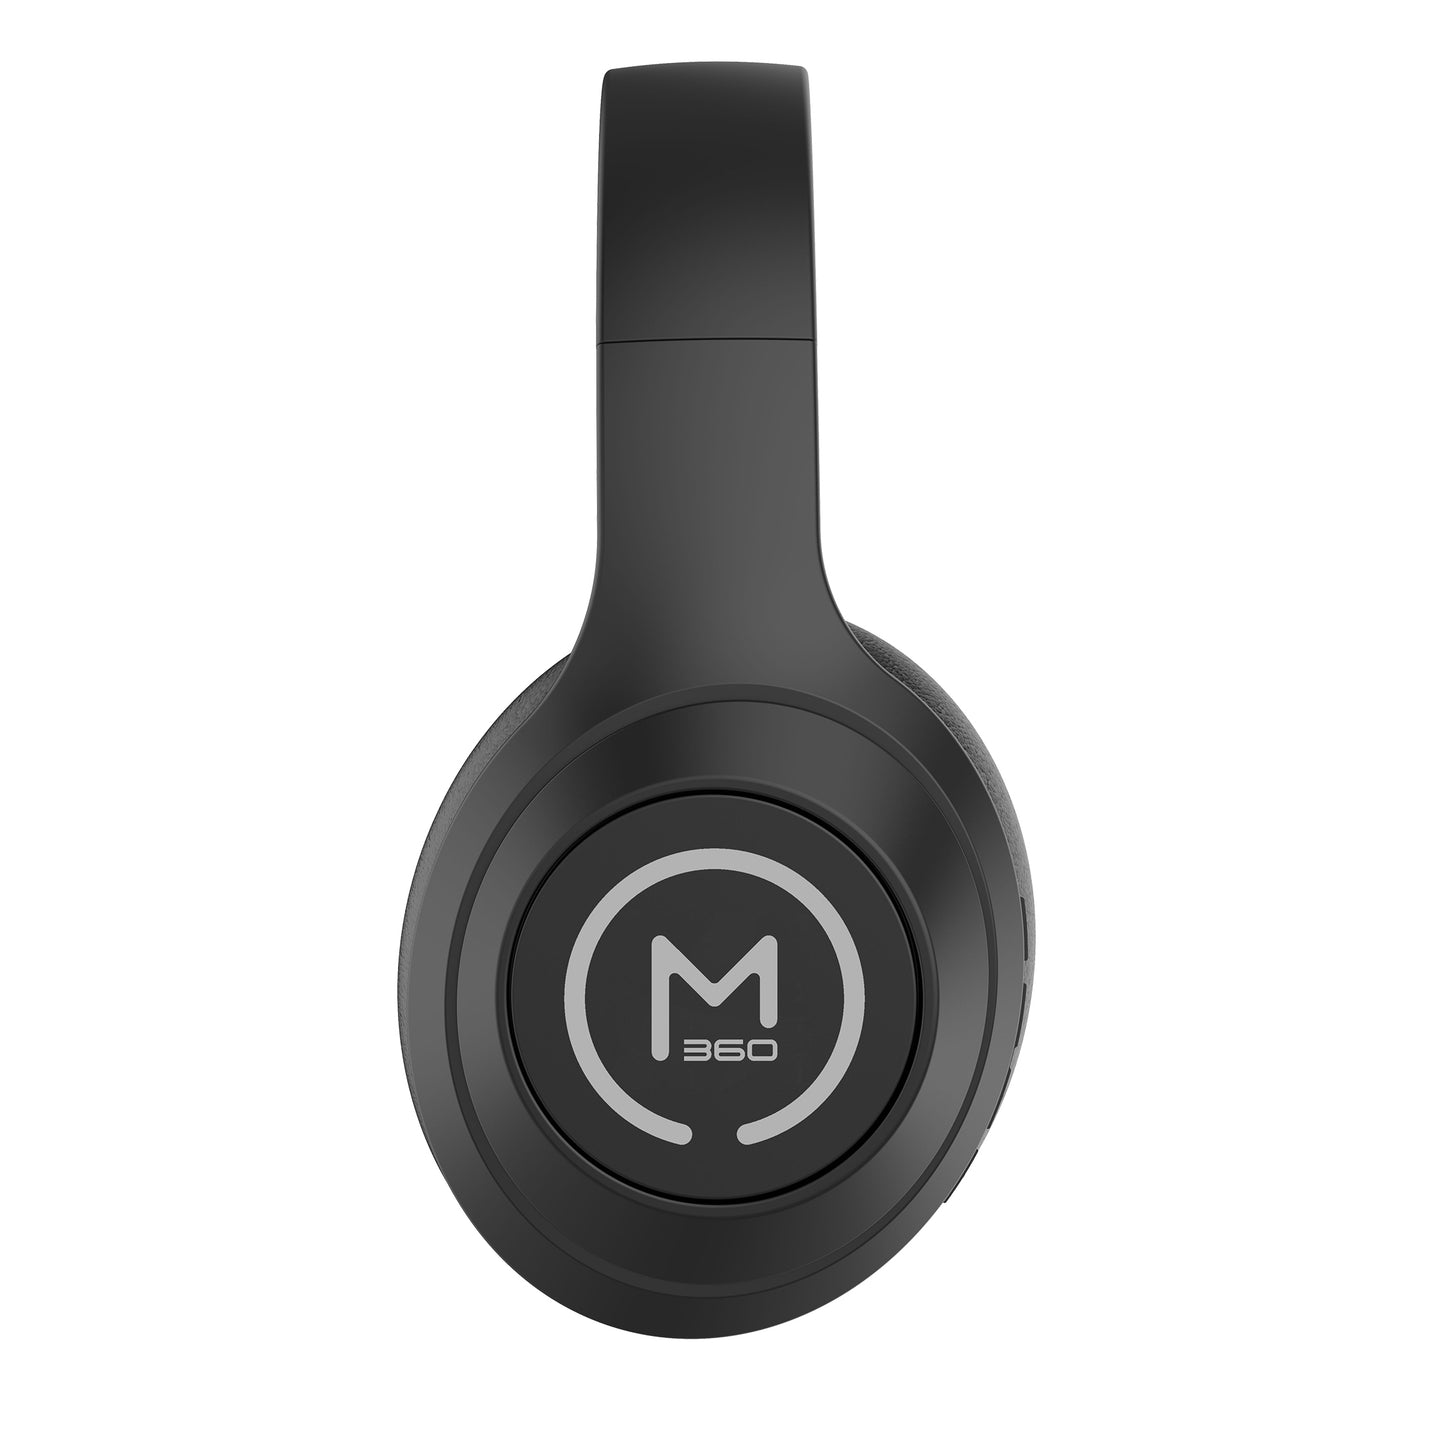 Morpheus 360 Comfort Plus Wireless Over-Ear Headphones - Bluetooth Headset with Microphone - 10H Playtime – Soft Comfortable Ear Cushions - HP6500